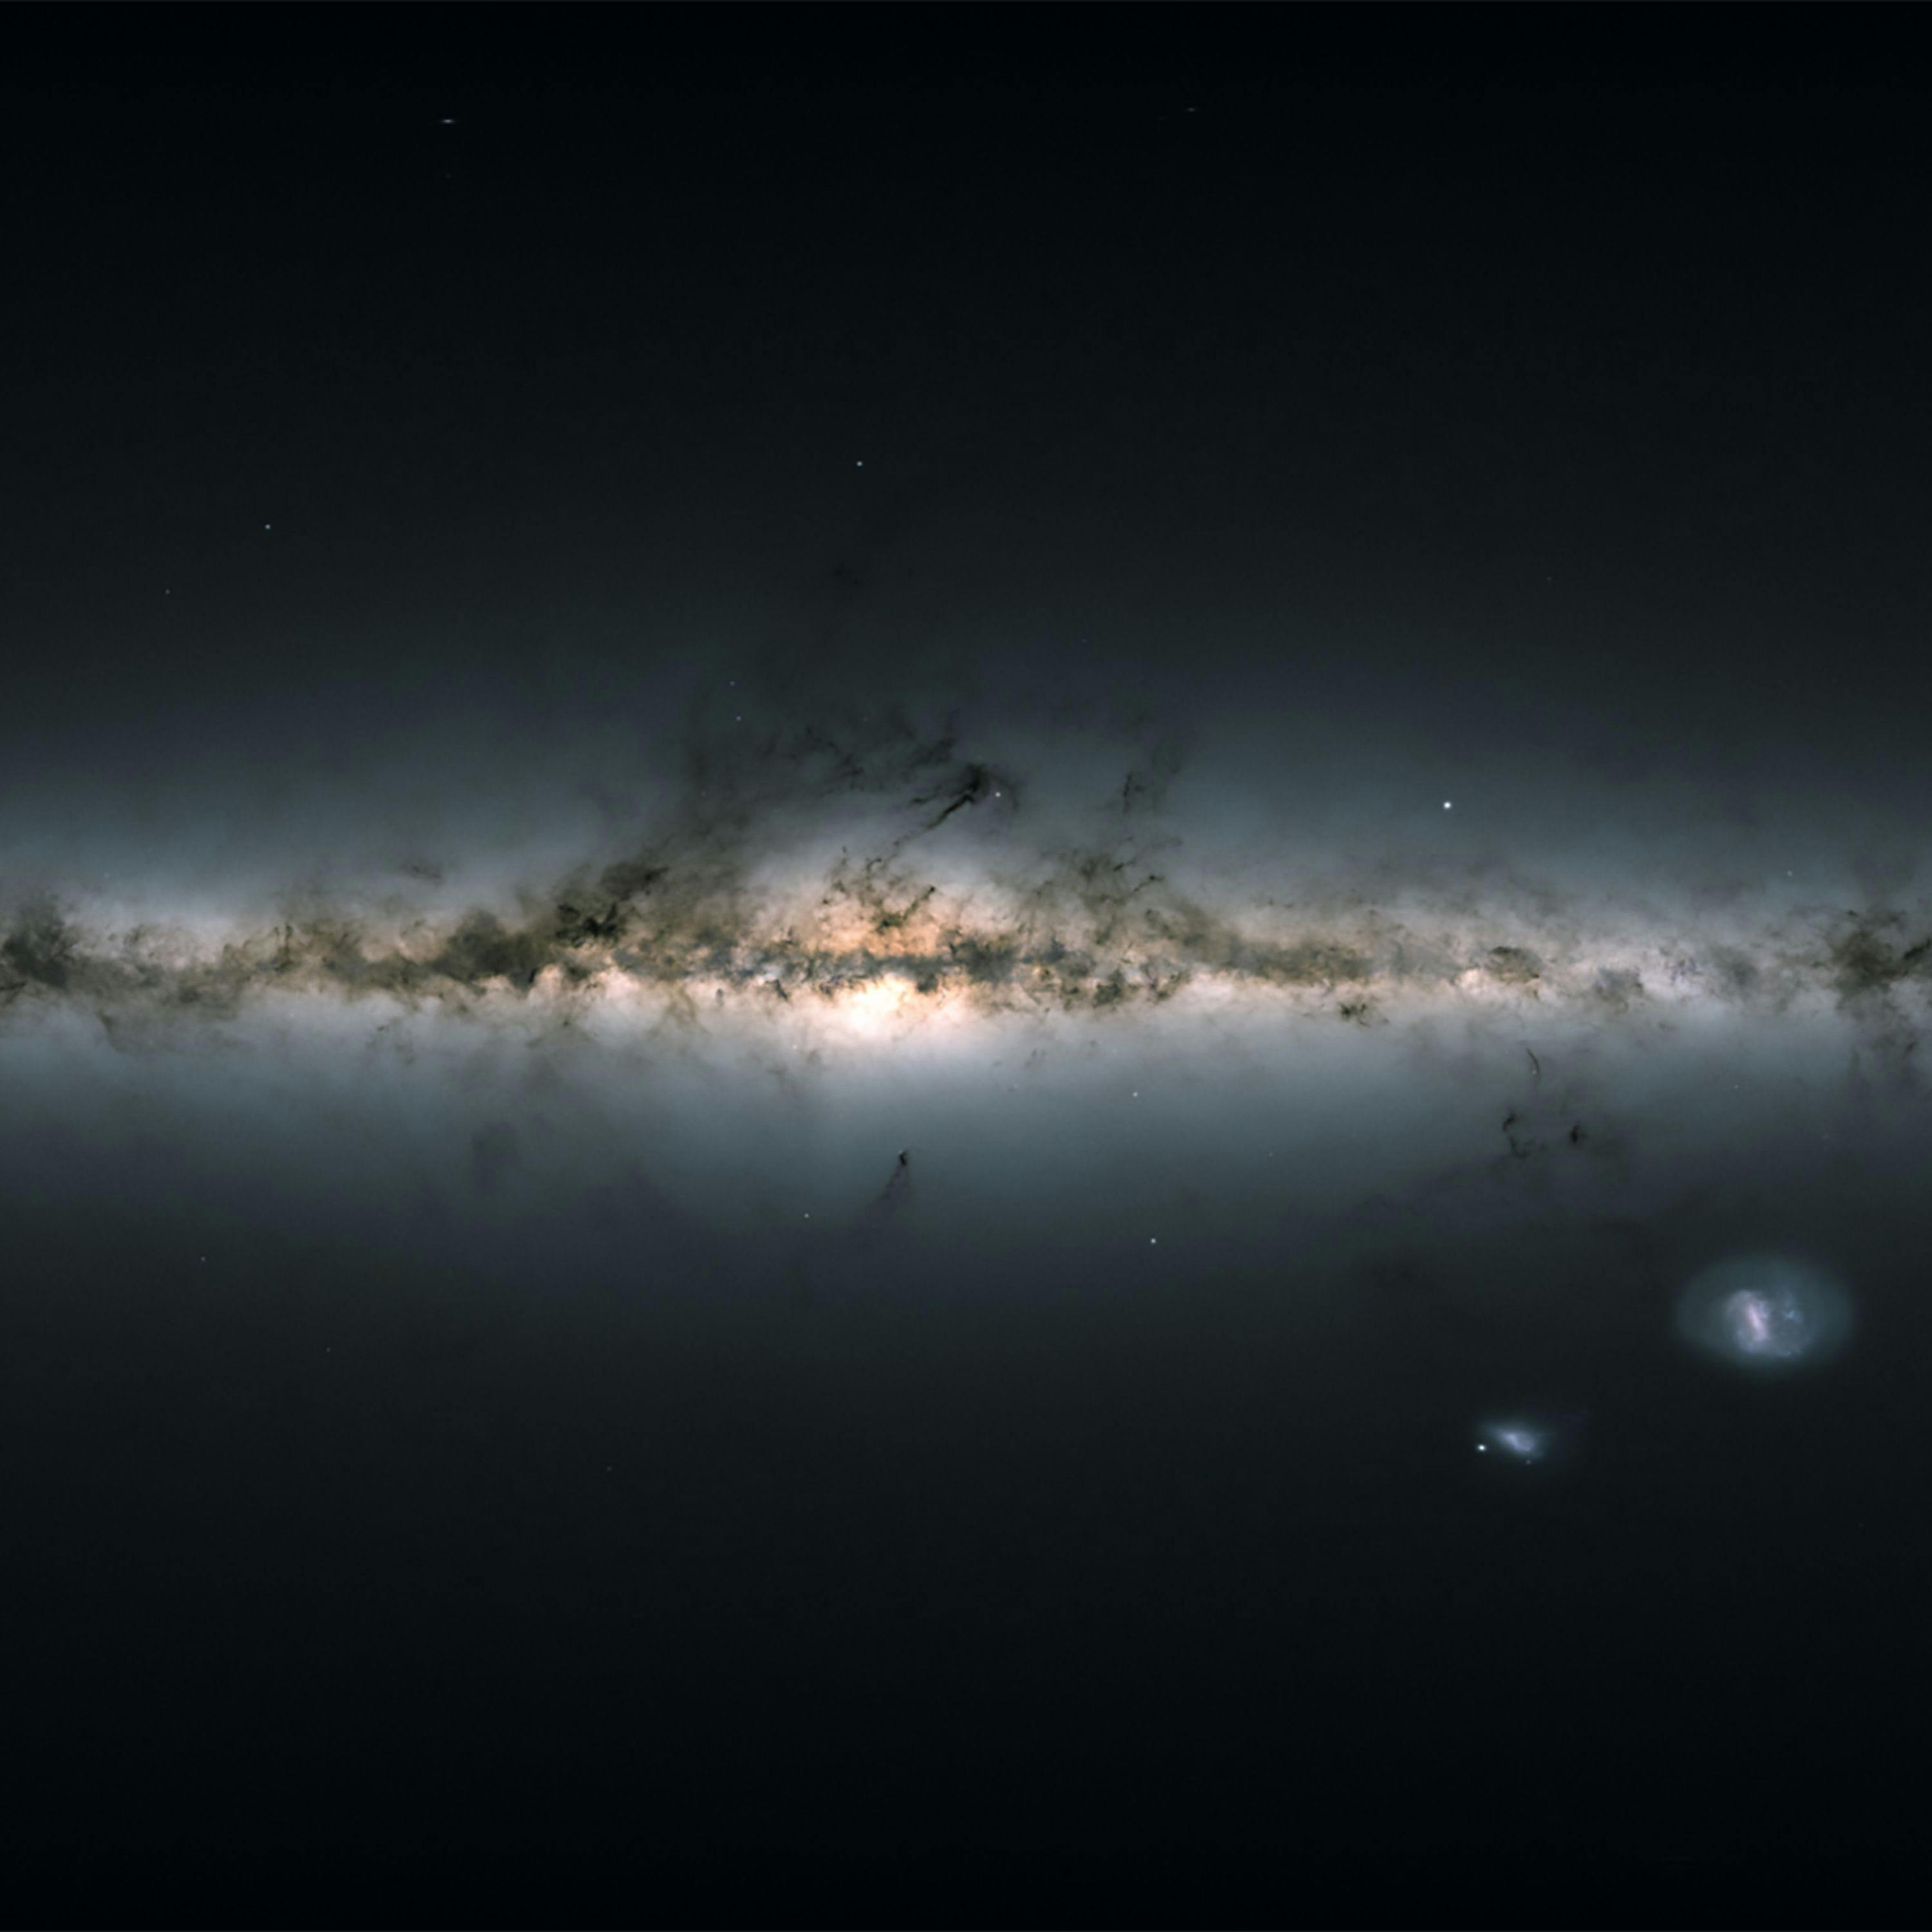 The mission to map the Milky Way